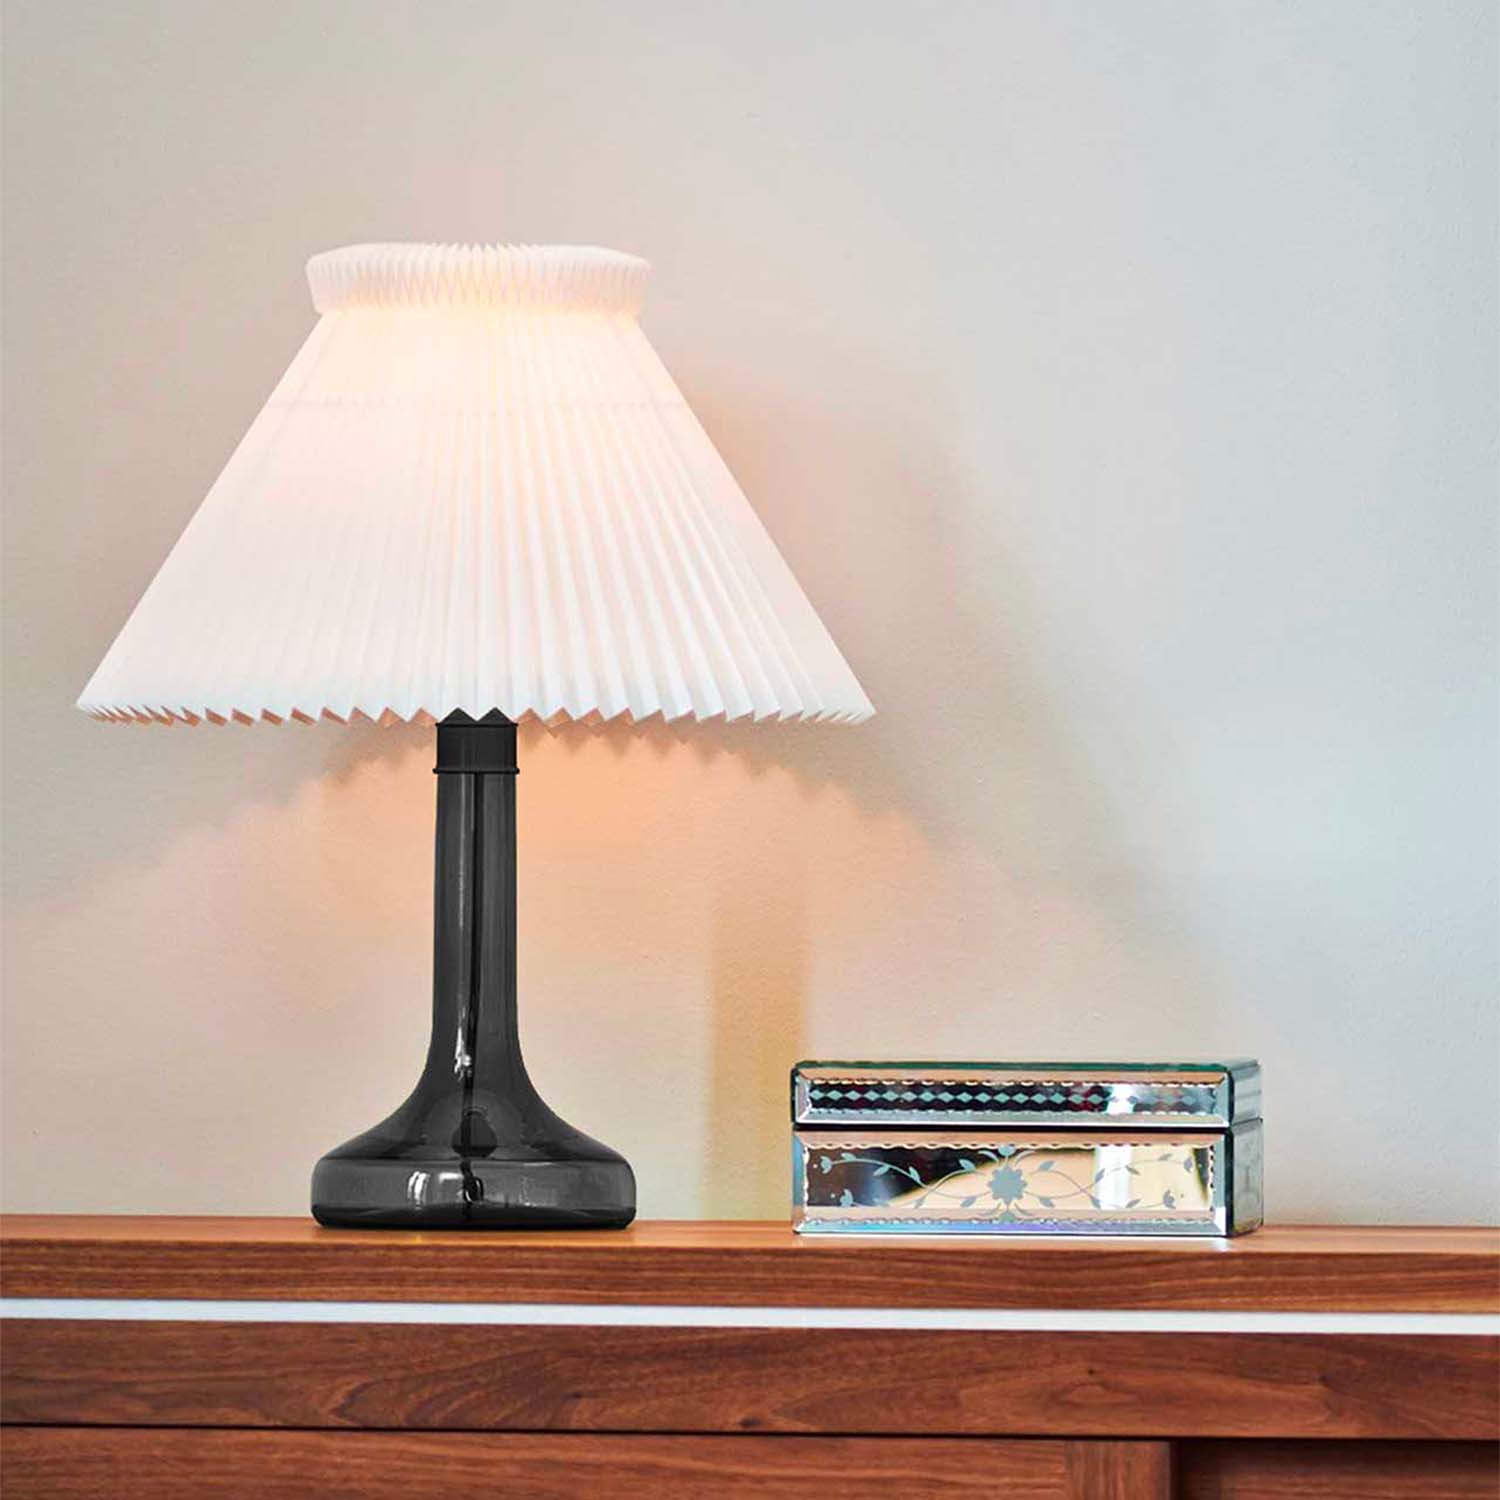 CLASSIC 343 - Handcrafted vintage desk lamp